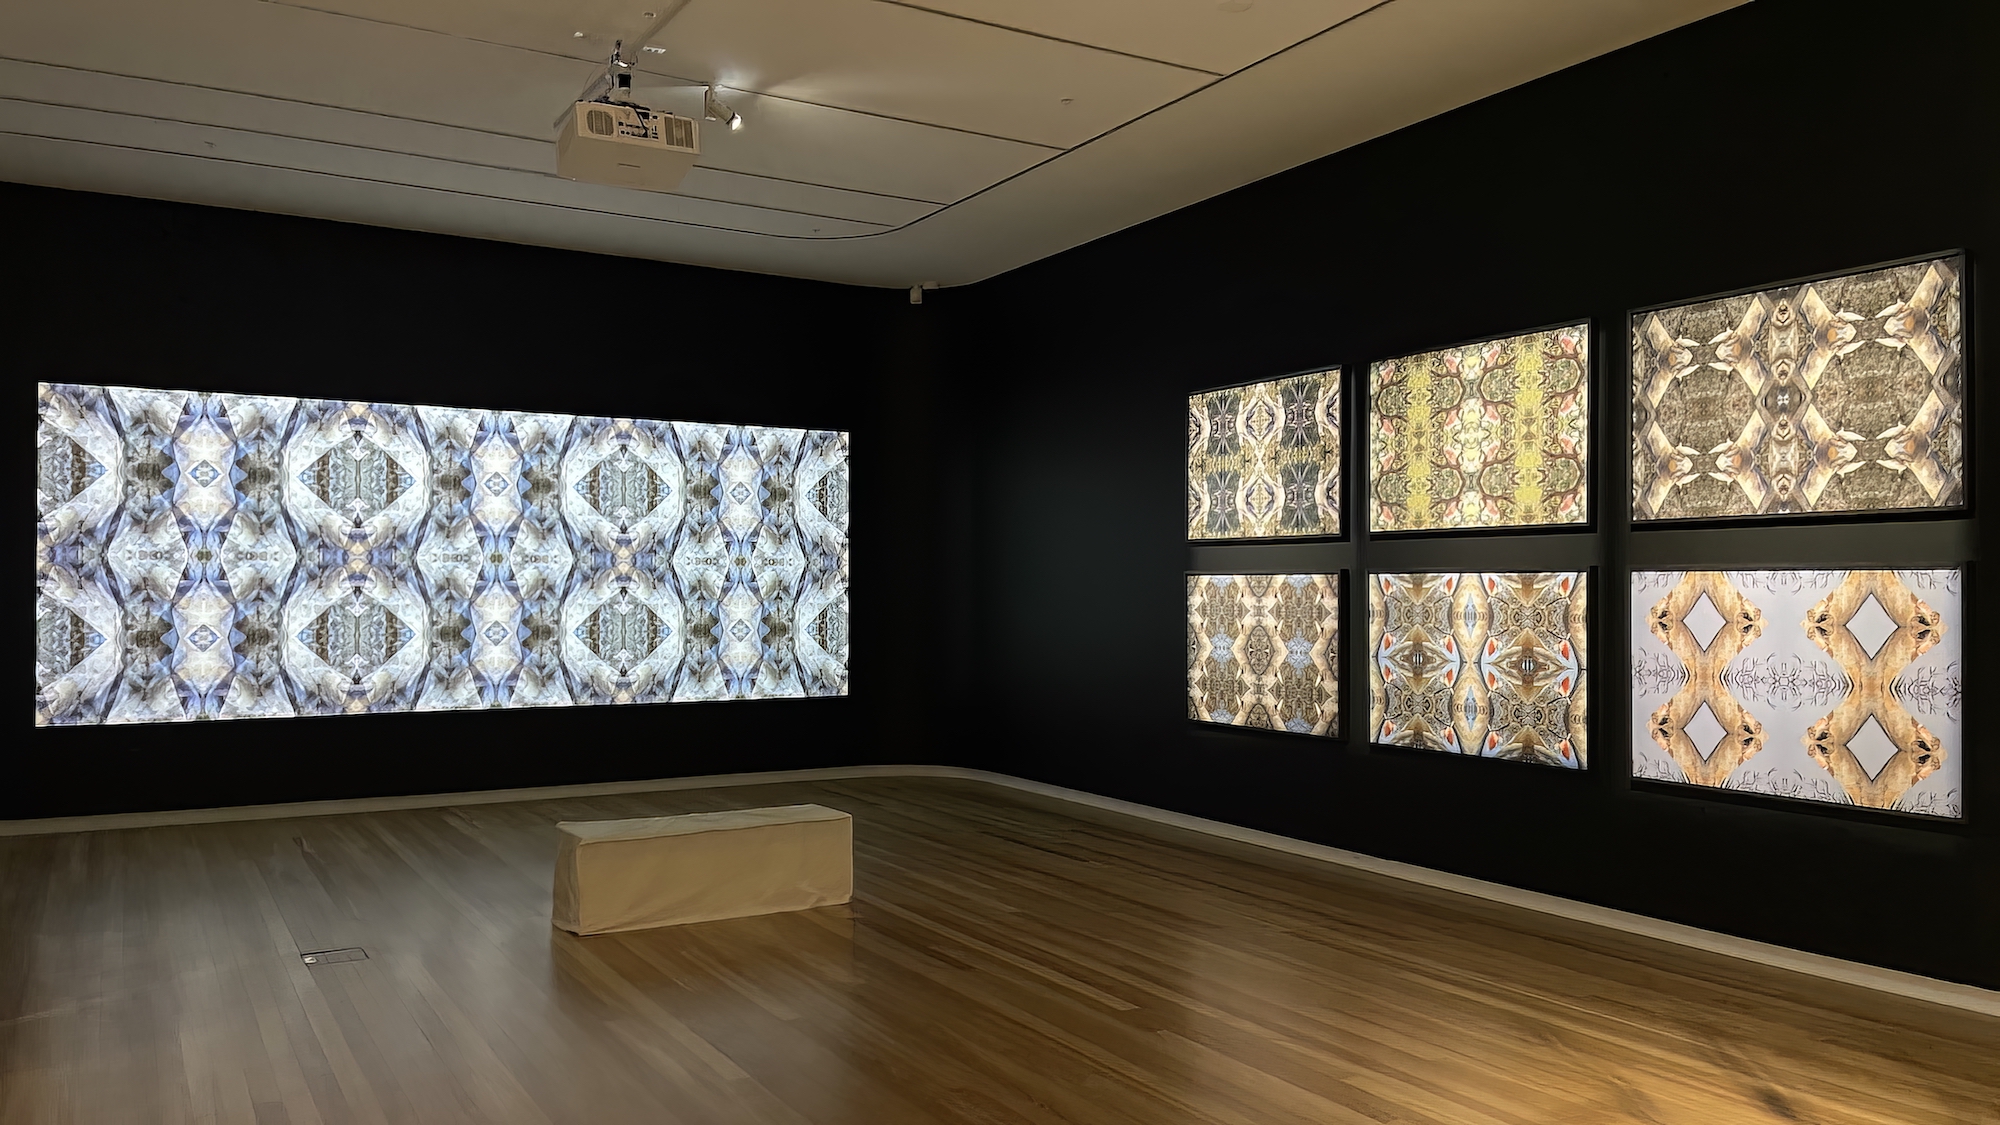 A dark room with lightbox artworks and a video projection featuring kaleidoscopic abstract designs